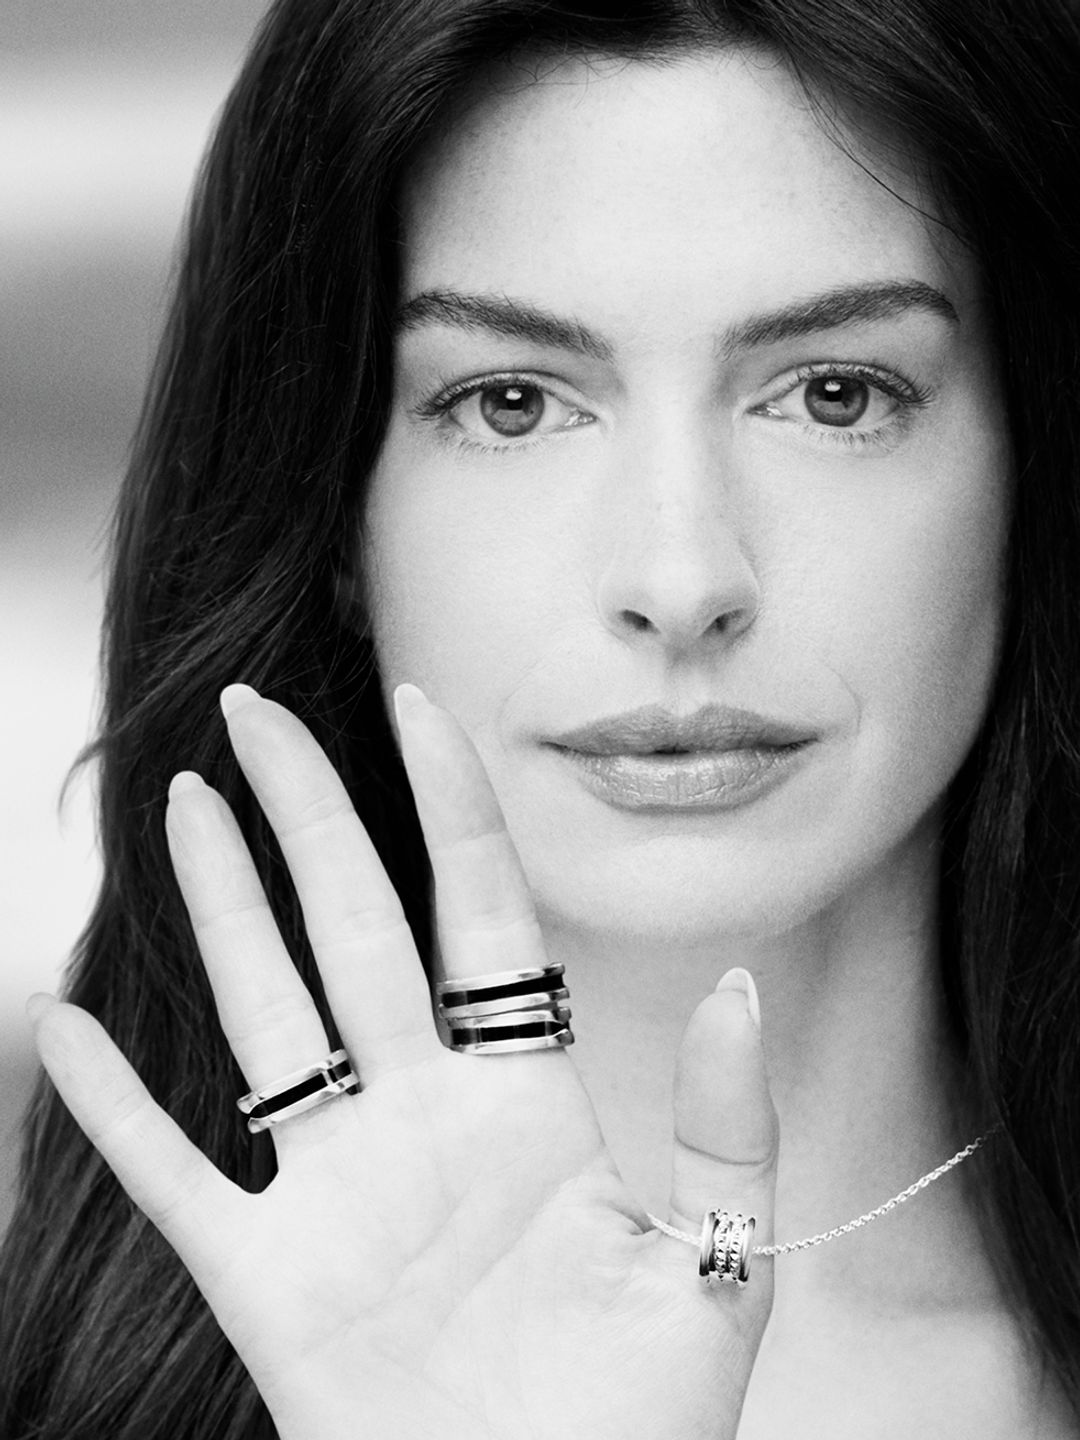 Anne Hathaway showcasing the new pendant alongside original Save the Children collection rings